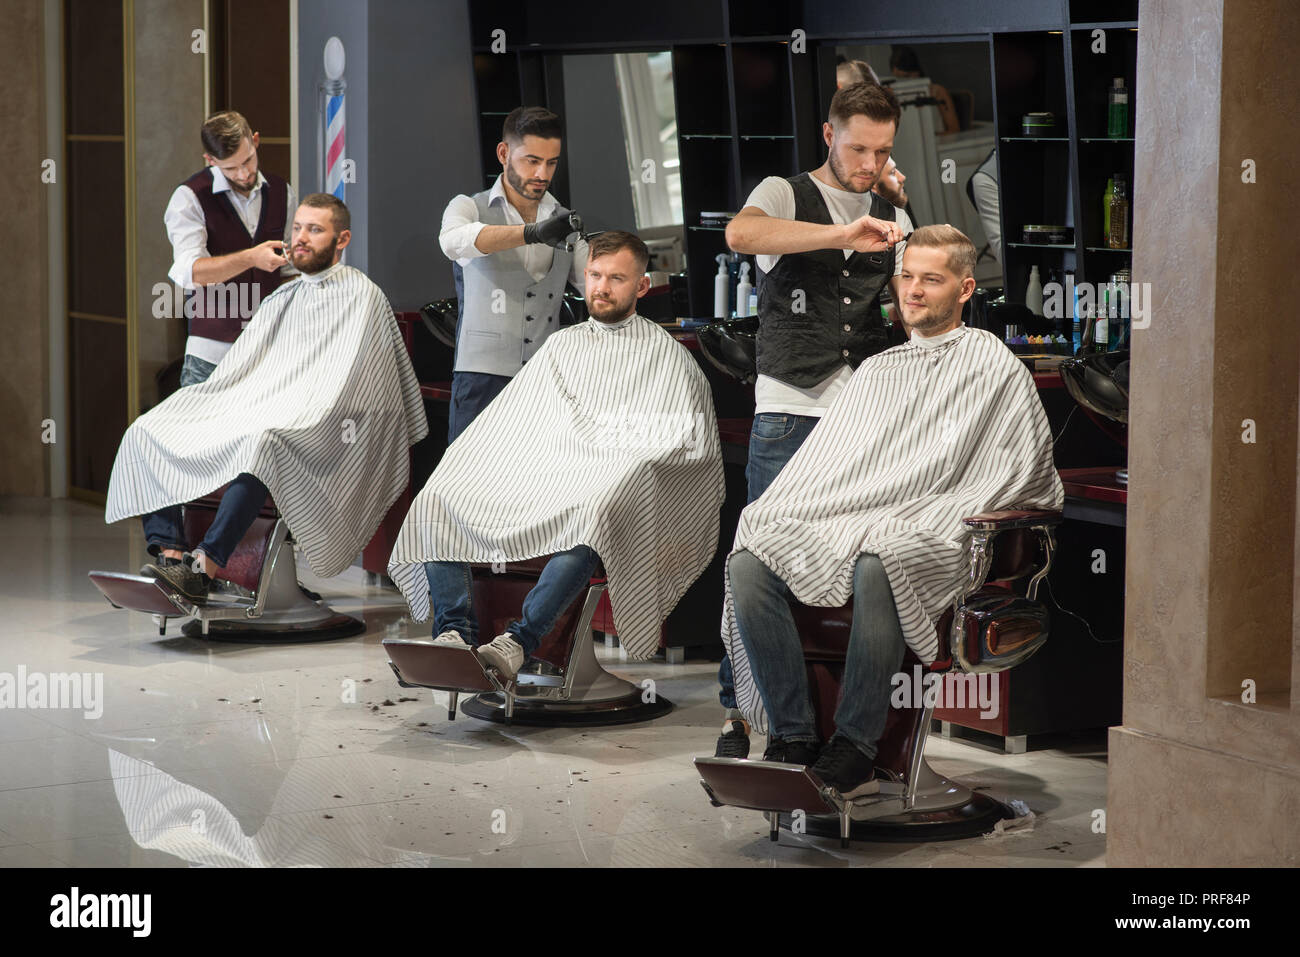 Process of styling and grooming men's haircuts in barbershop. Three professional and confident barbers standing and cutting hair of men. Male clients sitting in chairs and wearing haircut gowns. Stock Photo